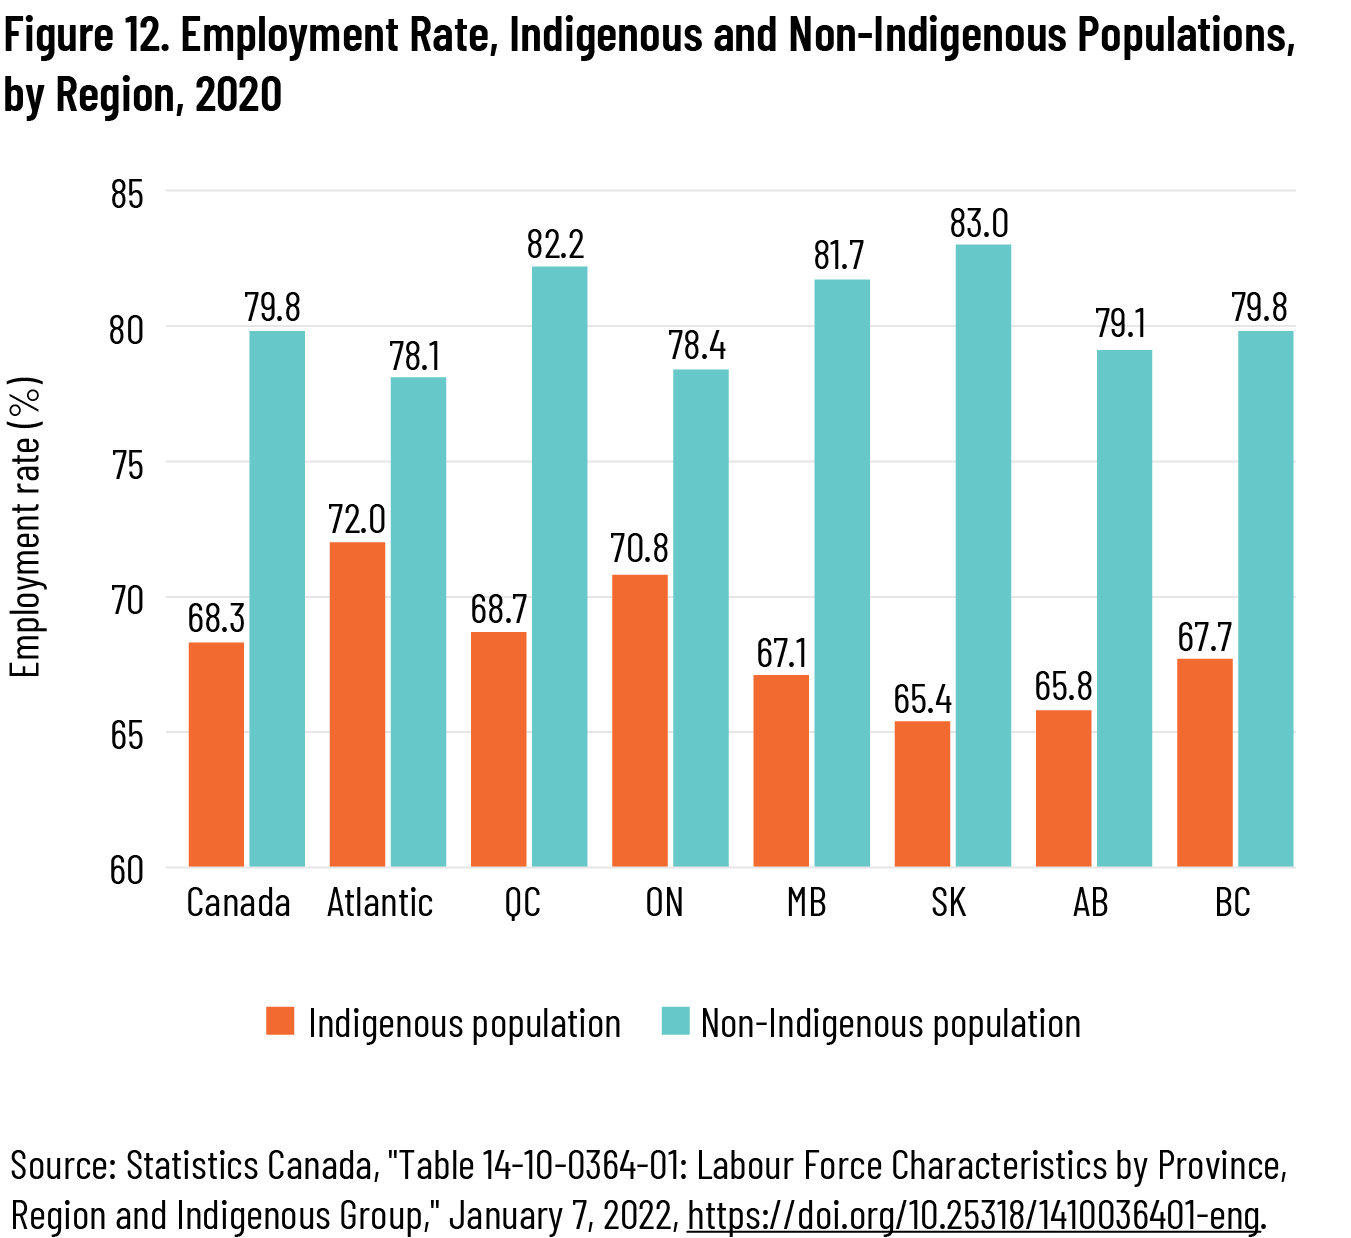 Figure 12. Employment Rate, Indigenous and Non-Indigenous Populations, by Region, 2020